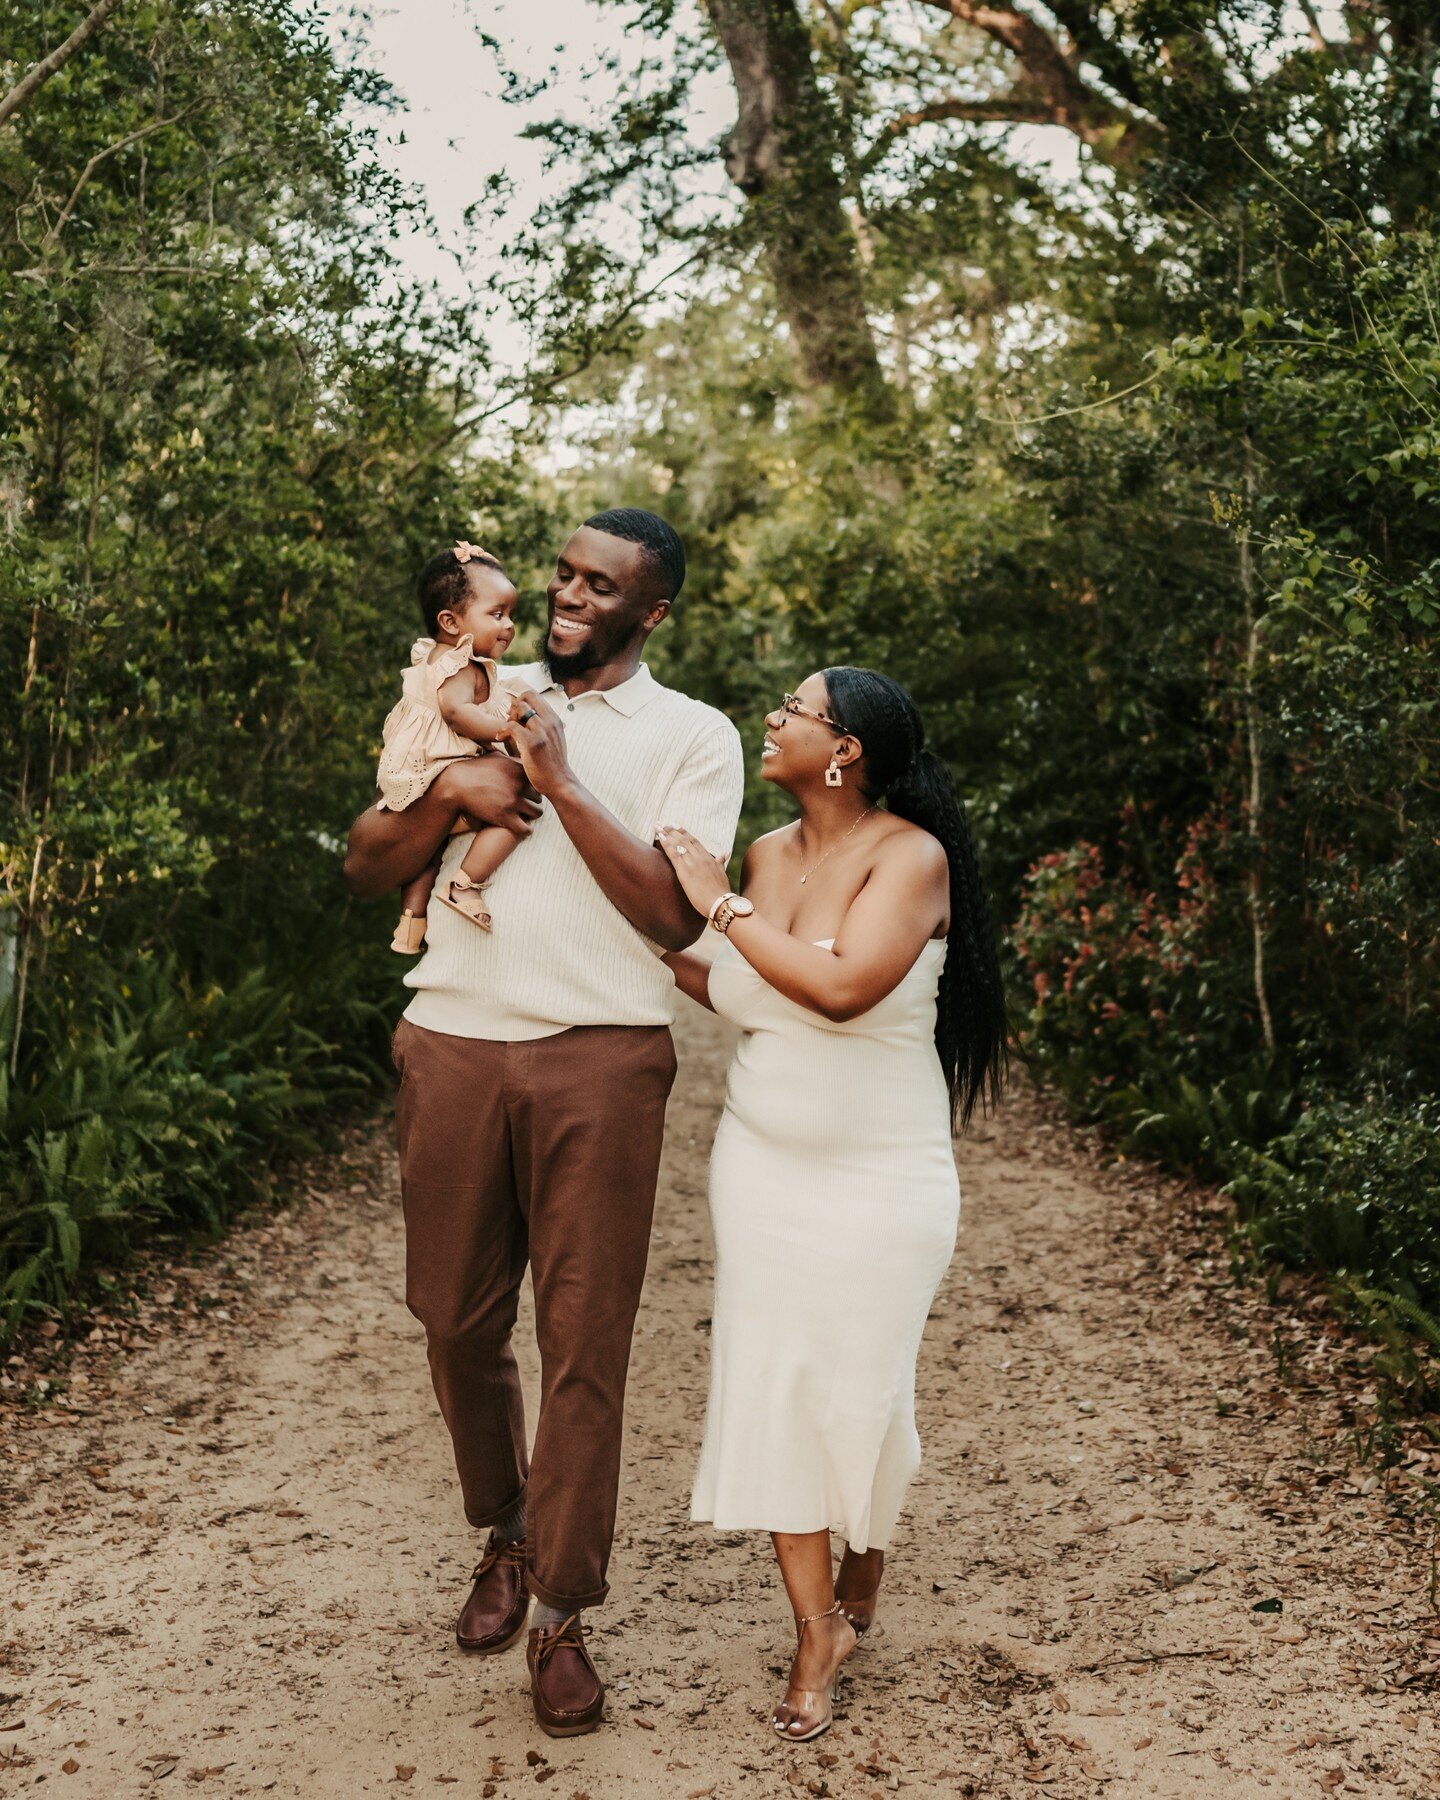 Got to meet the sweeeeeetest little family last night! #washingtonoaksstatepark never disappoints! It was so fun getting to capture these for you @dose.of.daquiana ❤️